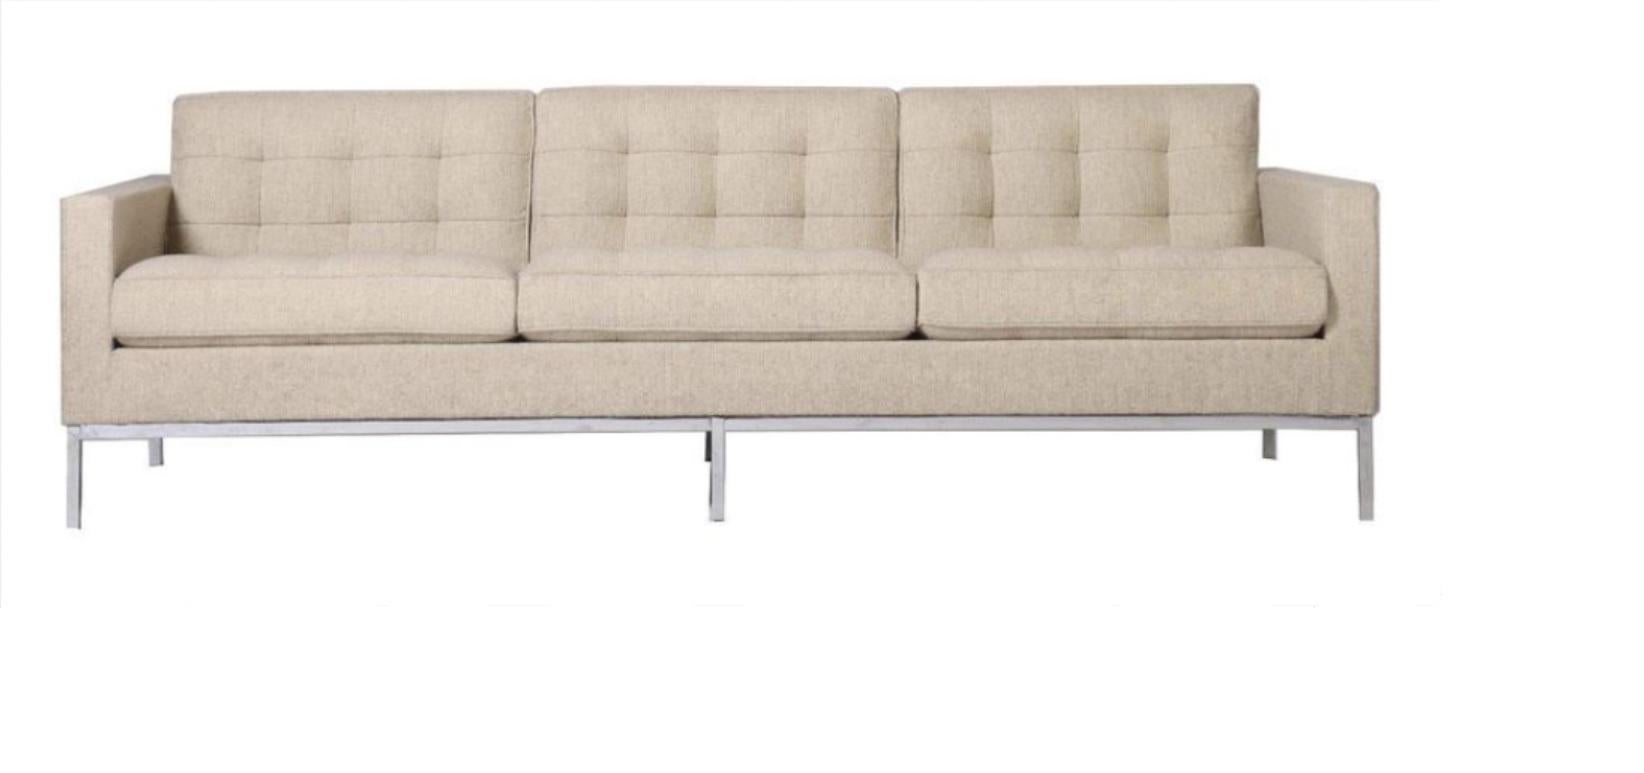 Late 20th Century Florence Knoll International, sofa 3 seats For Sale